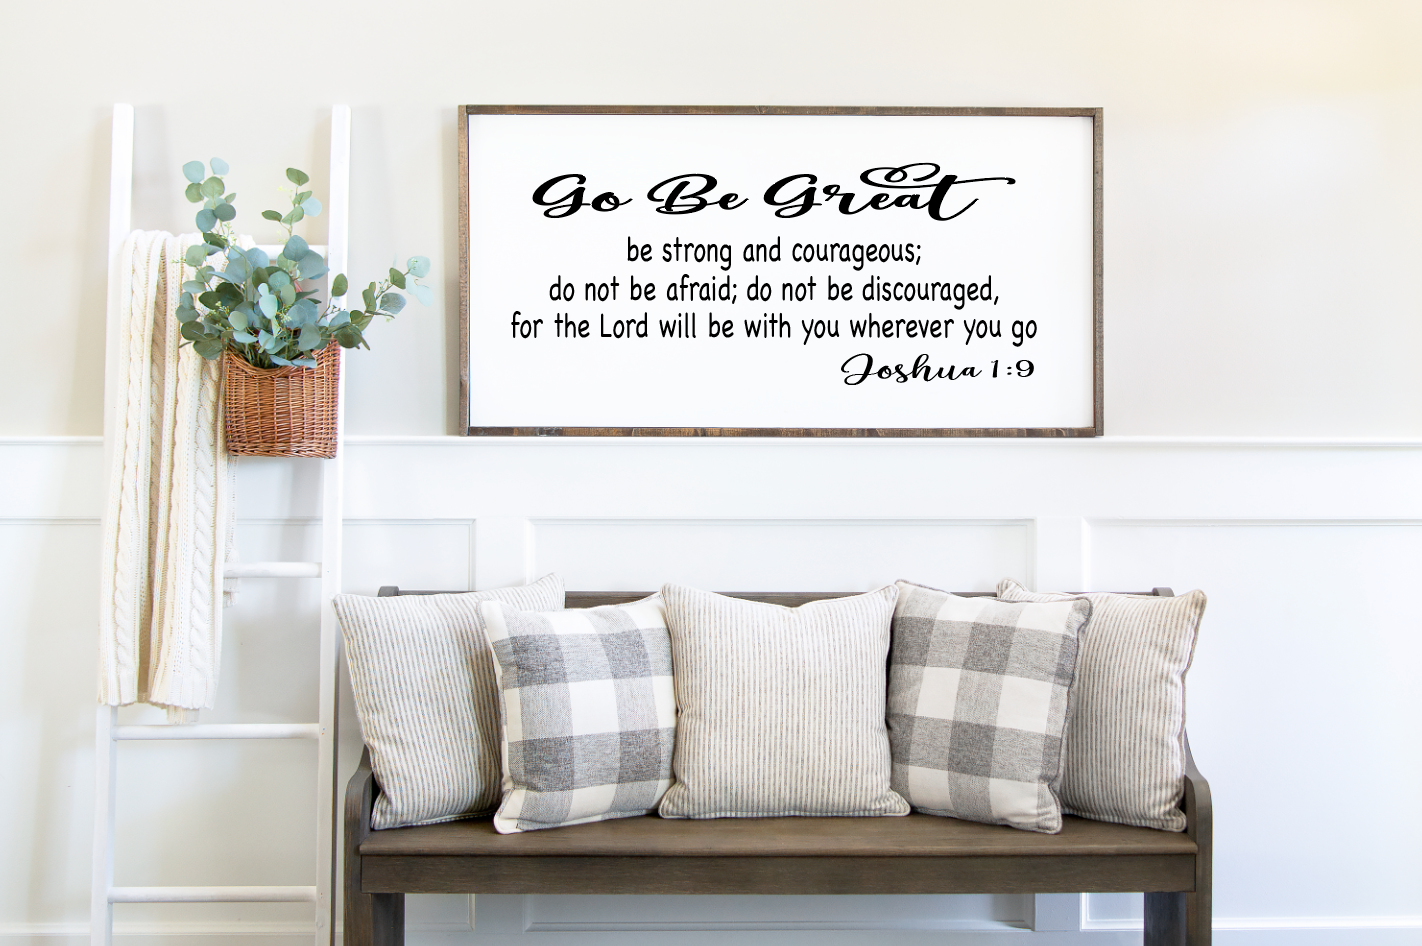 Go be great Joshua 1:9 new wood family sign